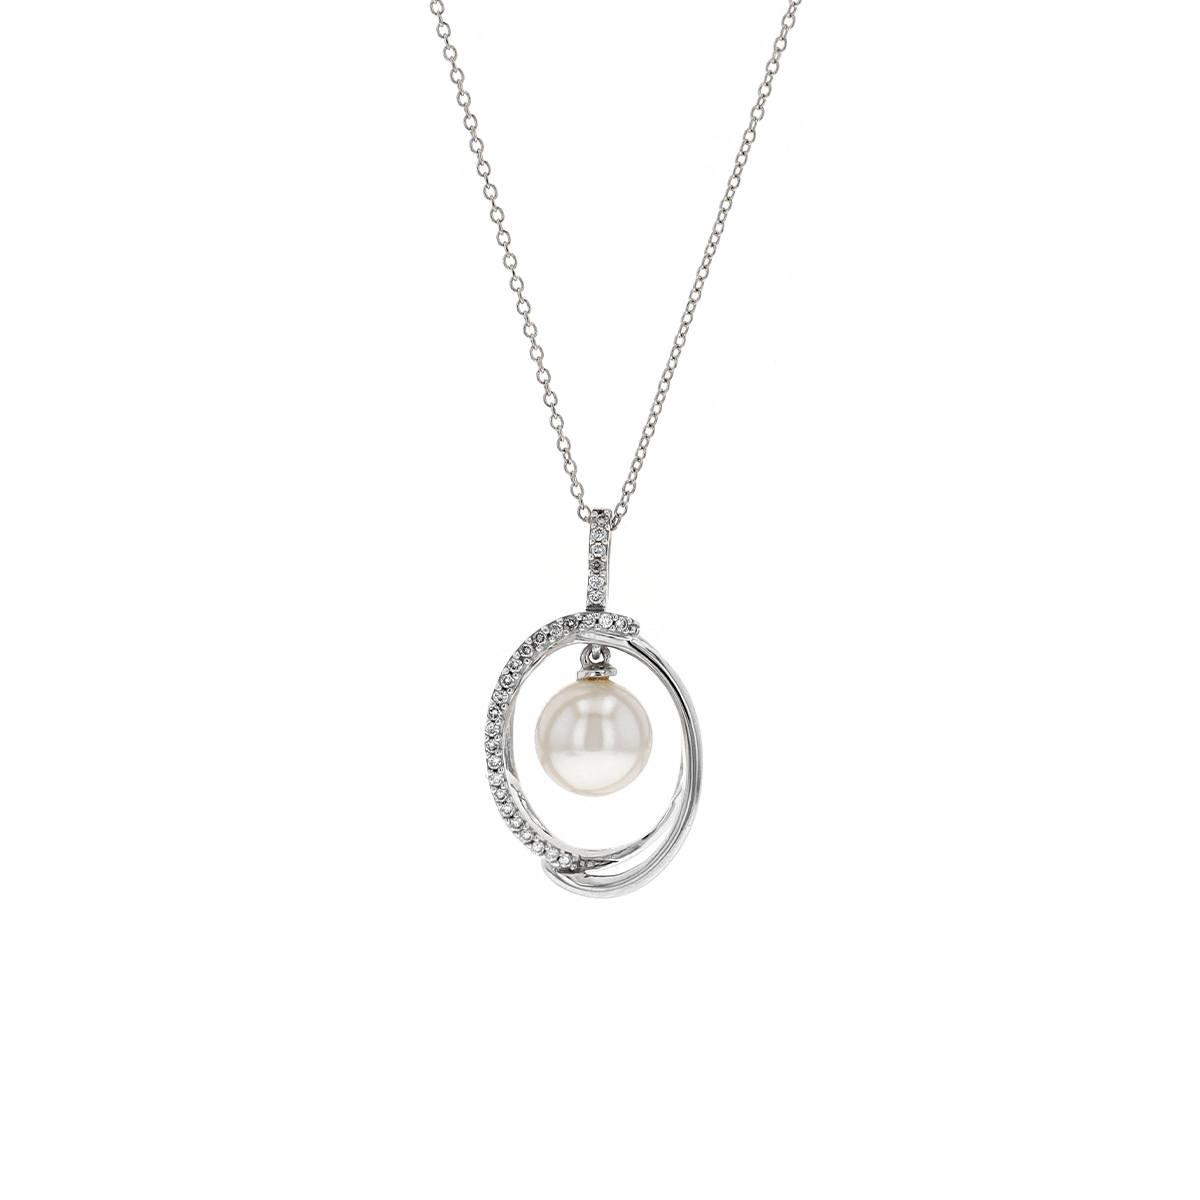 18K White Gold 8.5 mm Pearl and Diamond Pendant with Chain